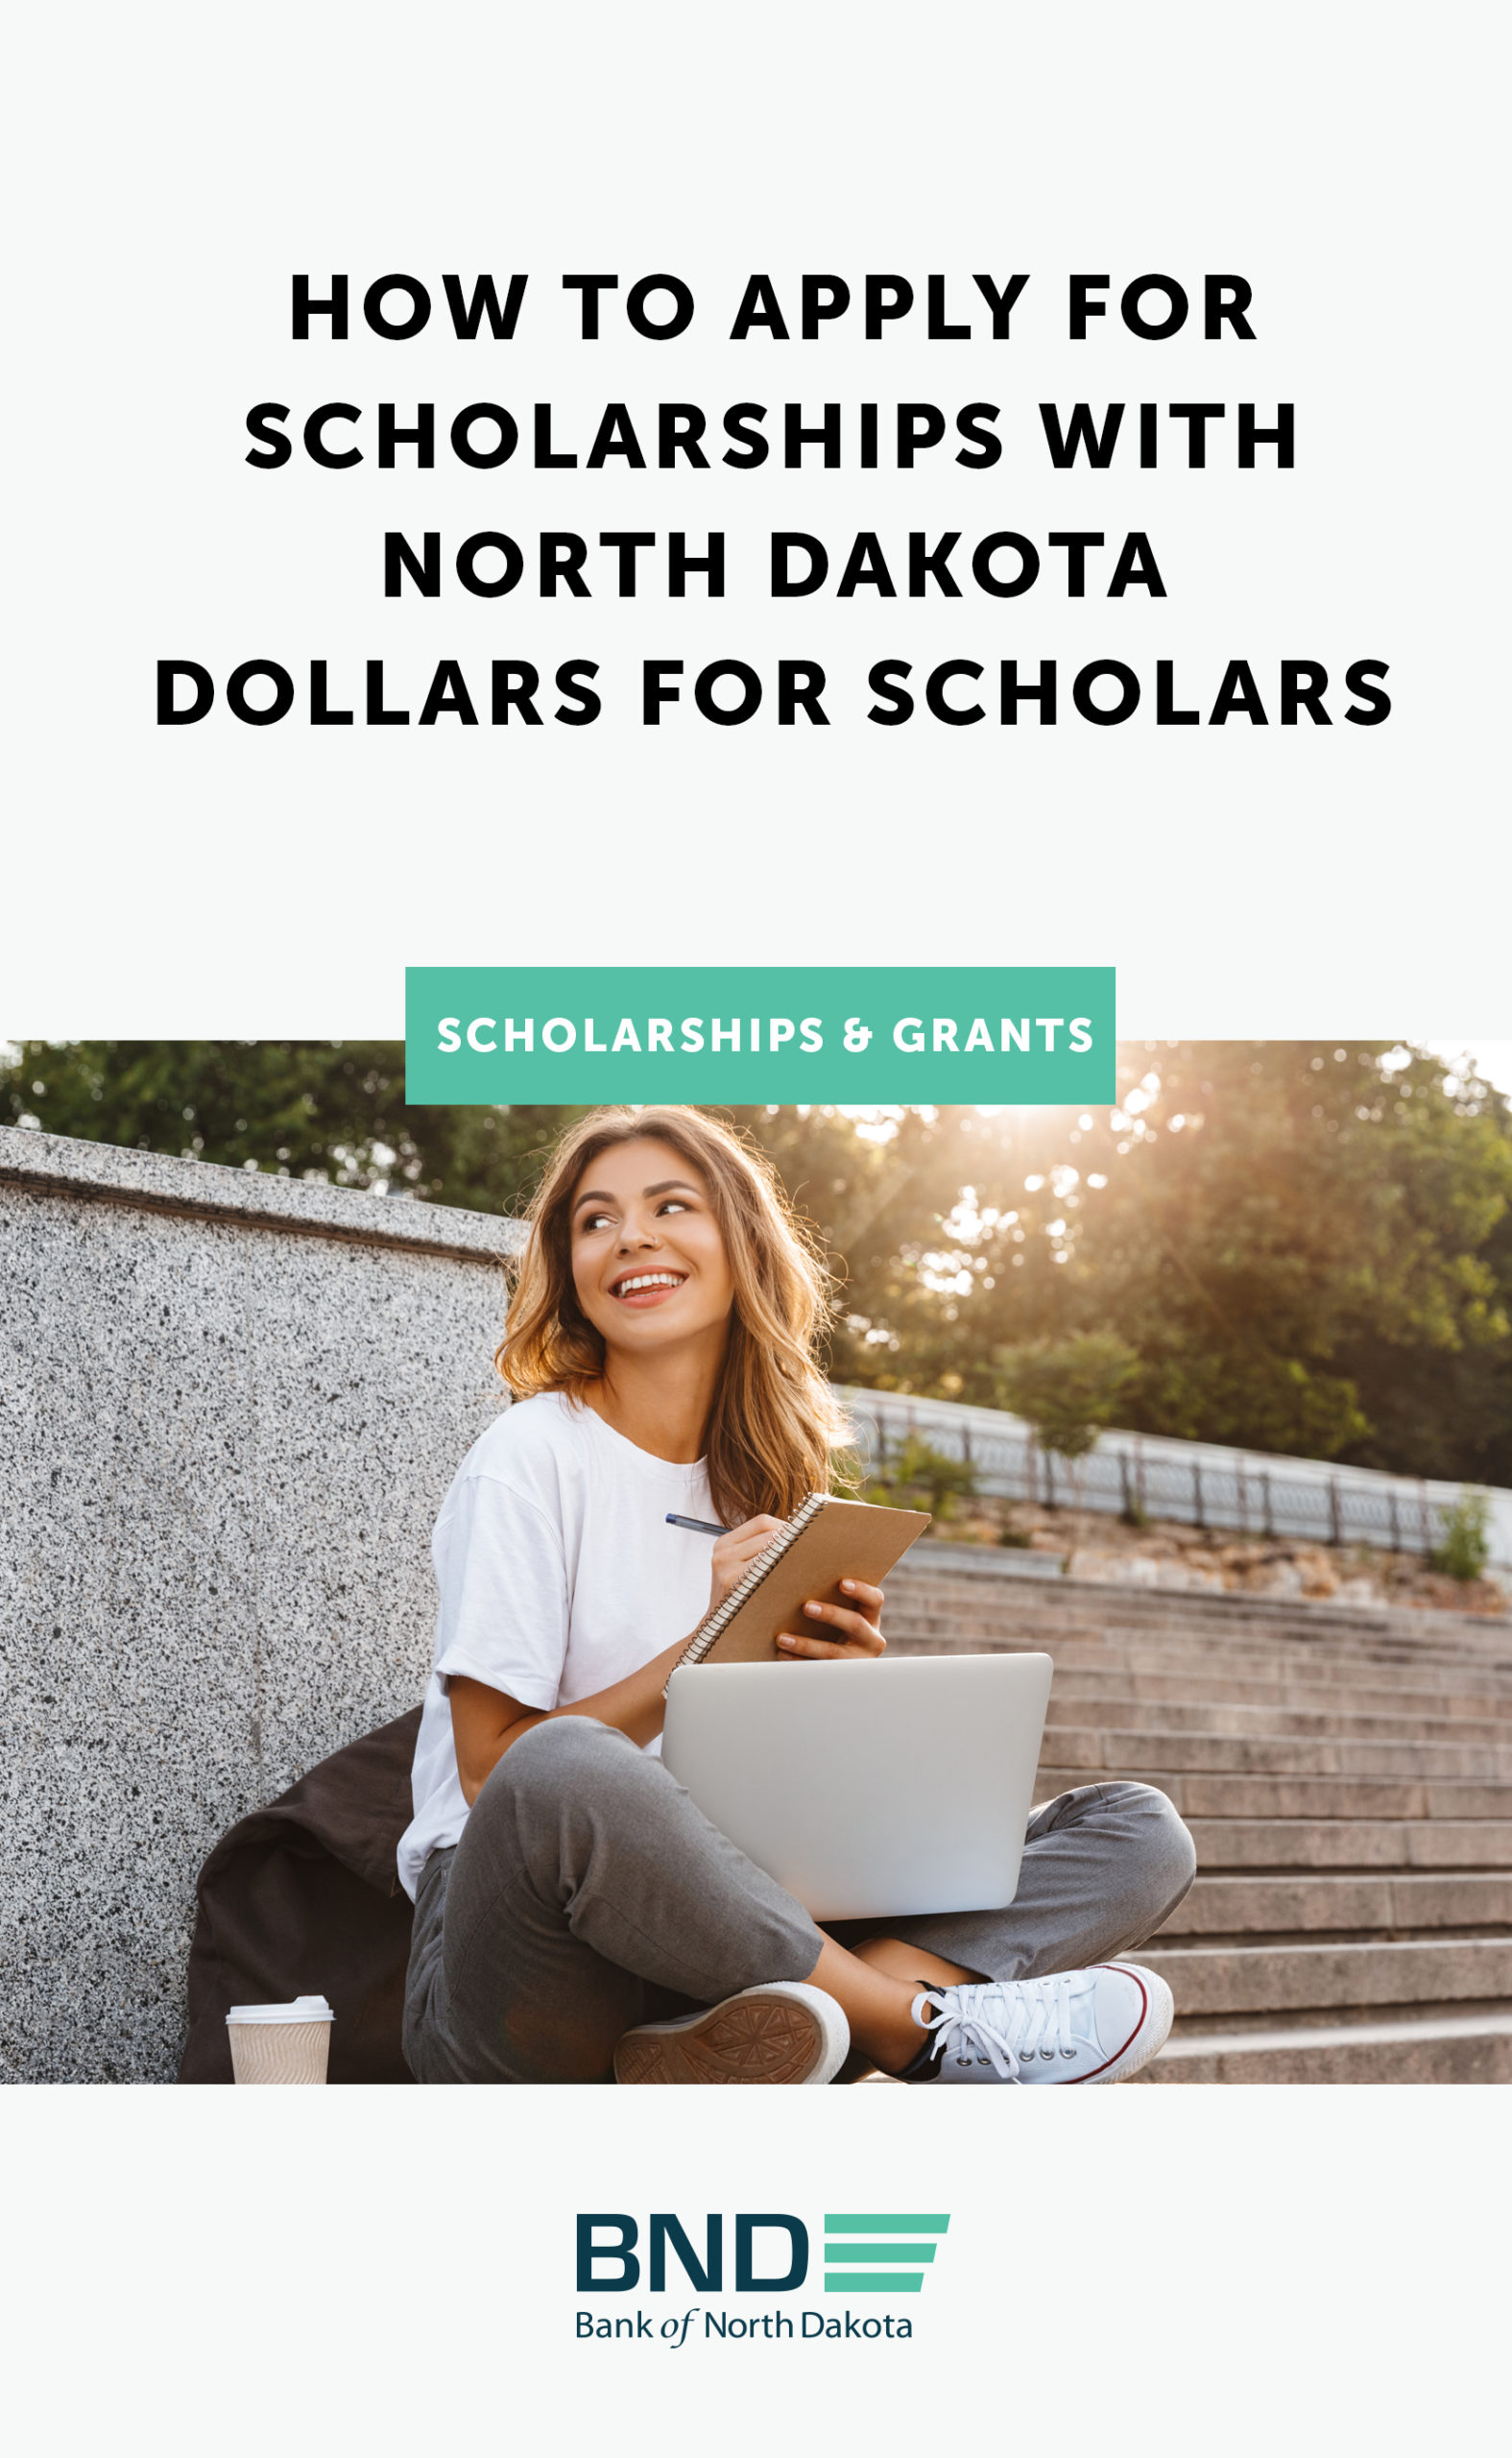 NDDFS-Scholarships-post-vertical